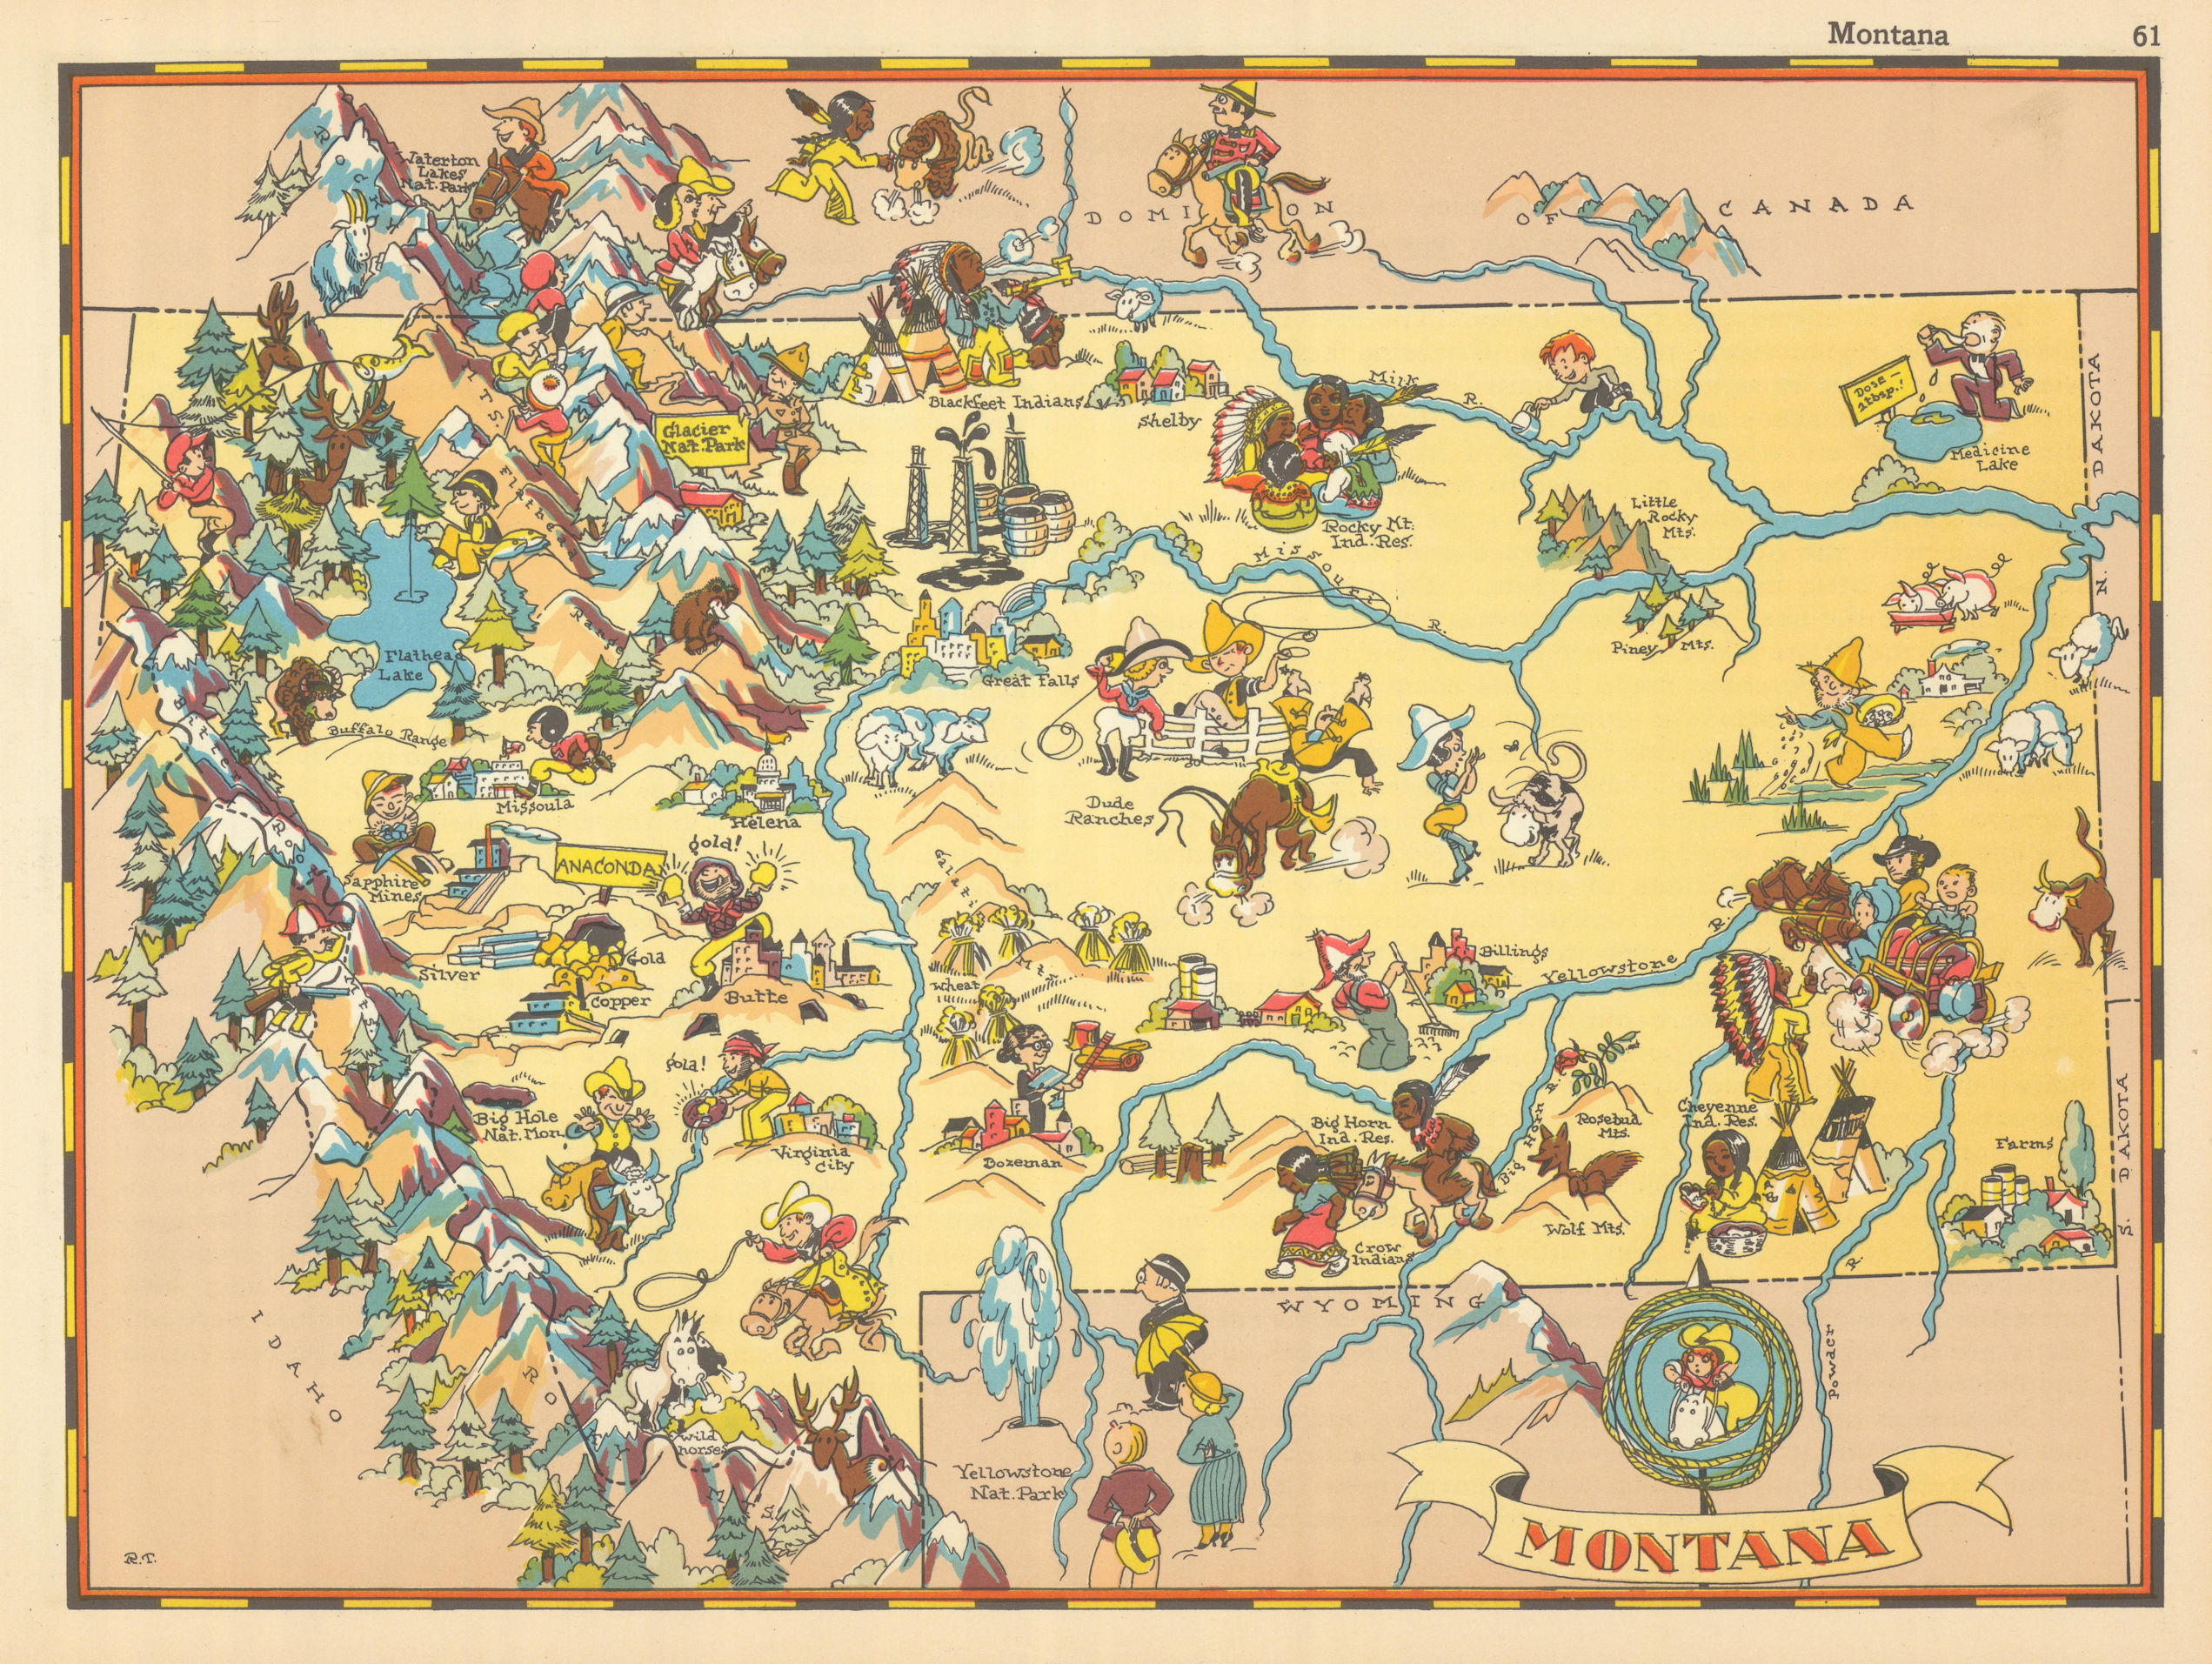 Associate Product Montana. Pictorial state map by Ruth Taylor White 1935 old vintage chart